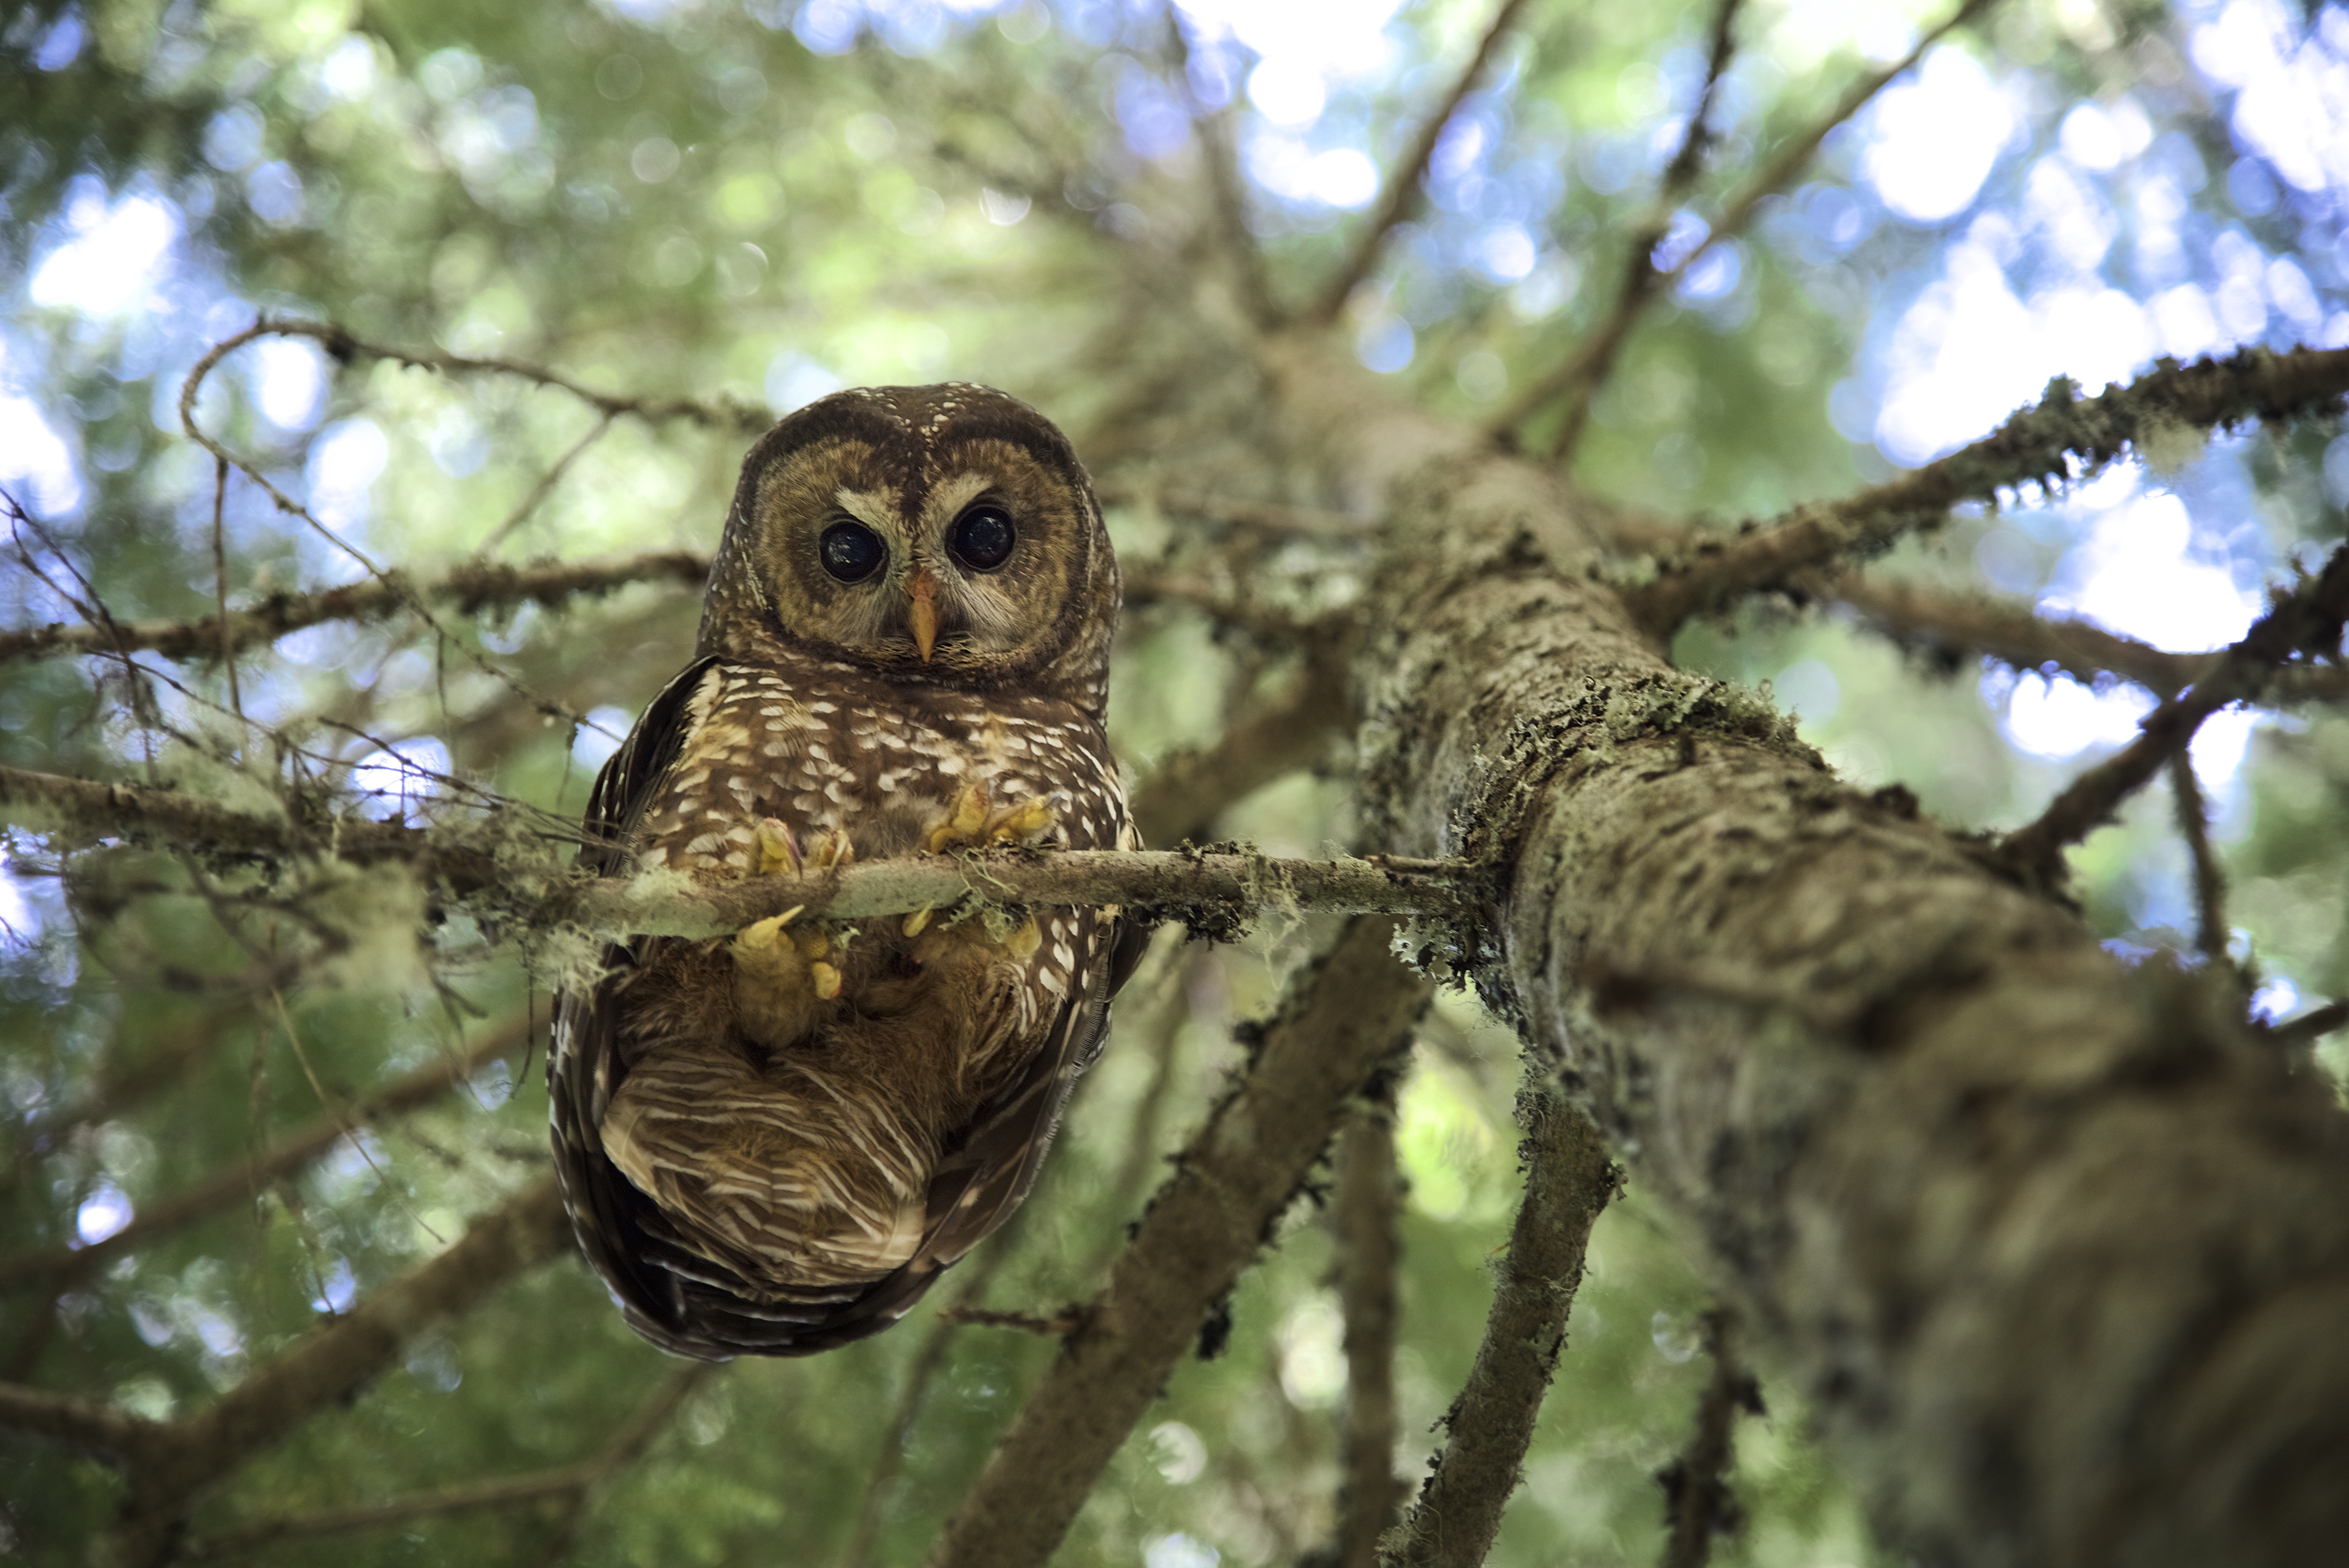 When the Endangered Species Act listed spotted owls in the Pacific Northwest, some logging companies were prevented from logging parts of their land. The proposed changes would allow for economics to play a role in listing decisions rather than just scientific data.